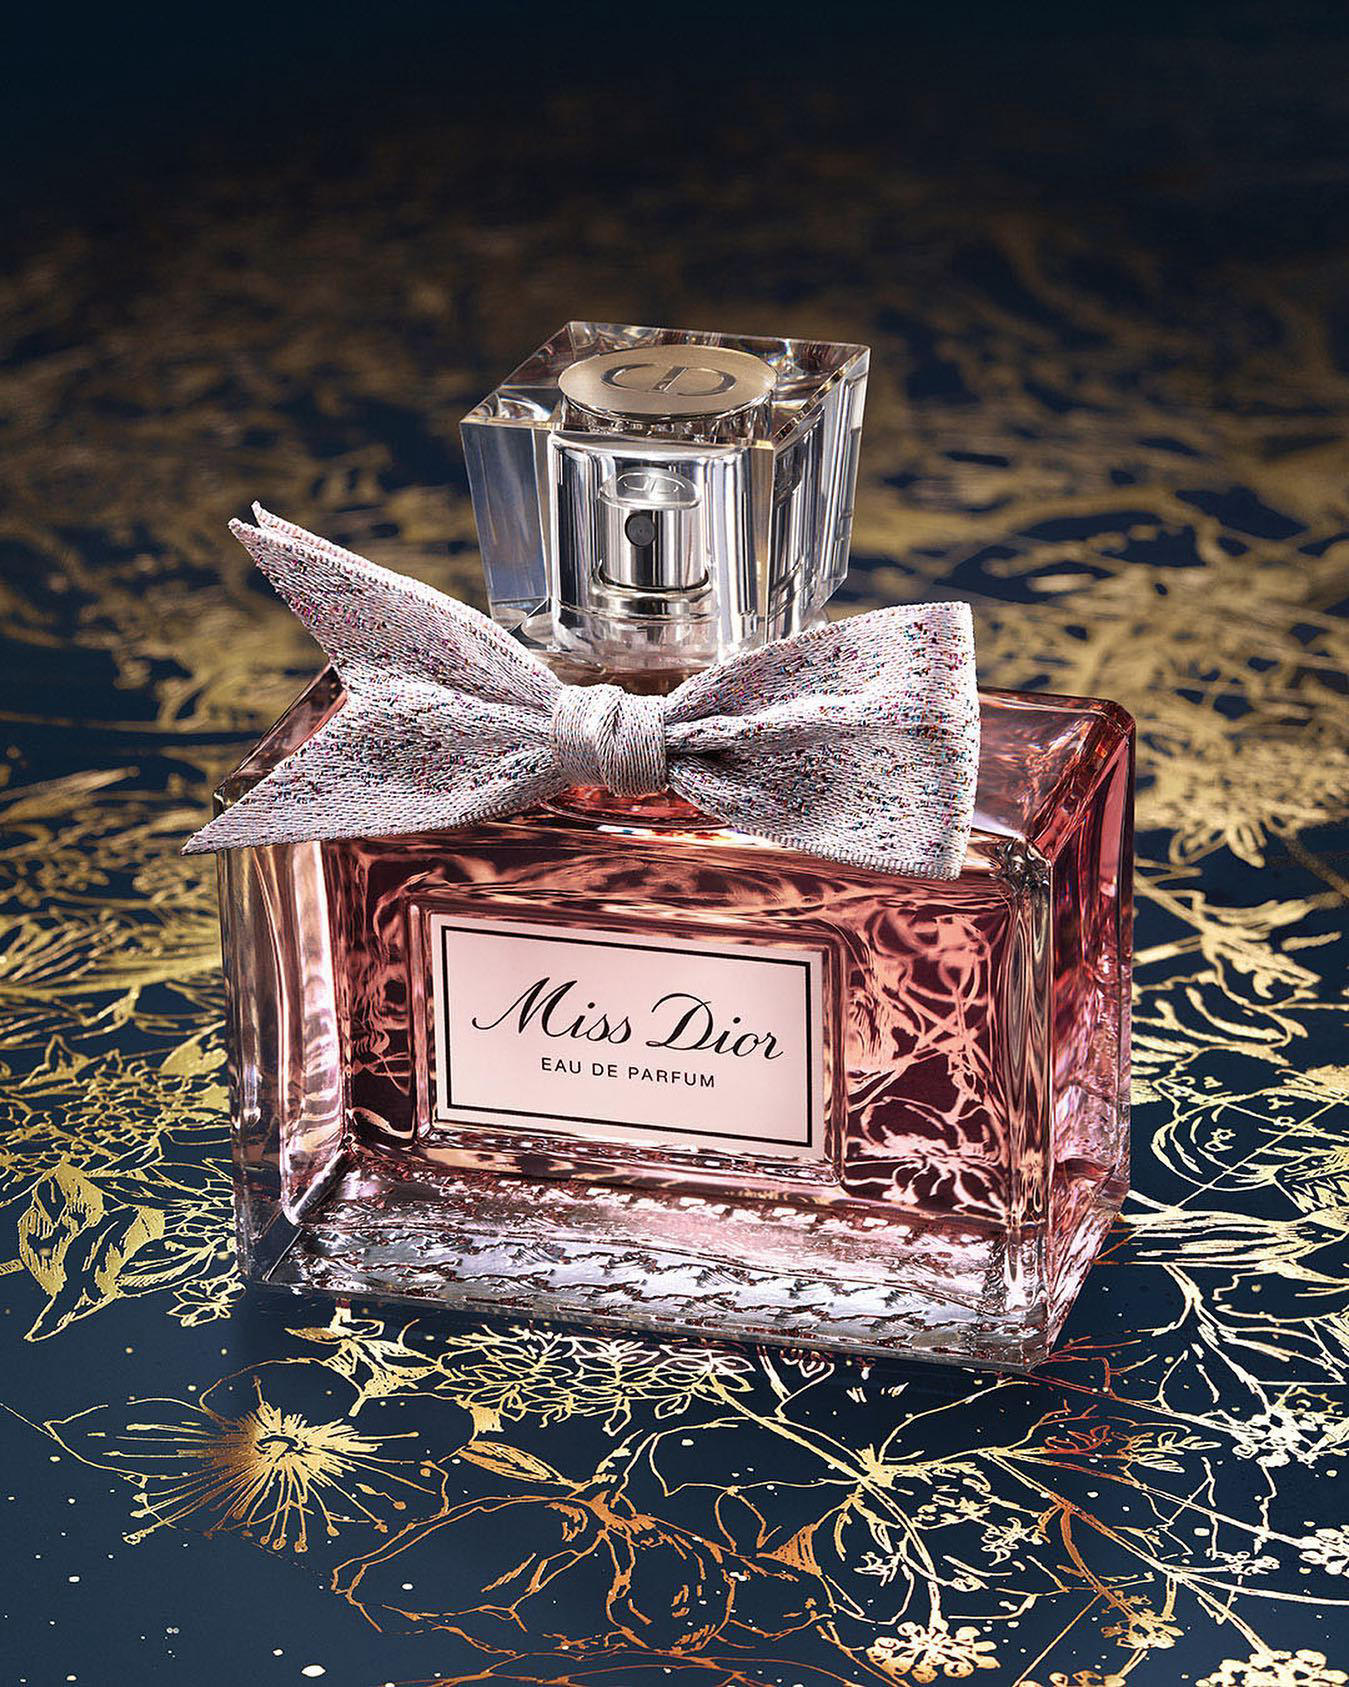 Dior Official - Wake up for love with #MissDior’s Millefiori bouquet, a sparkling constellation of f